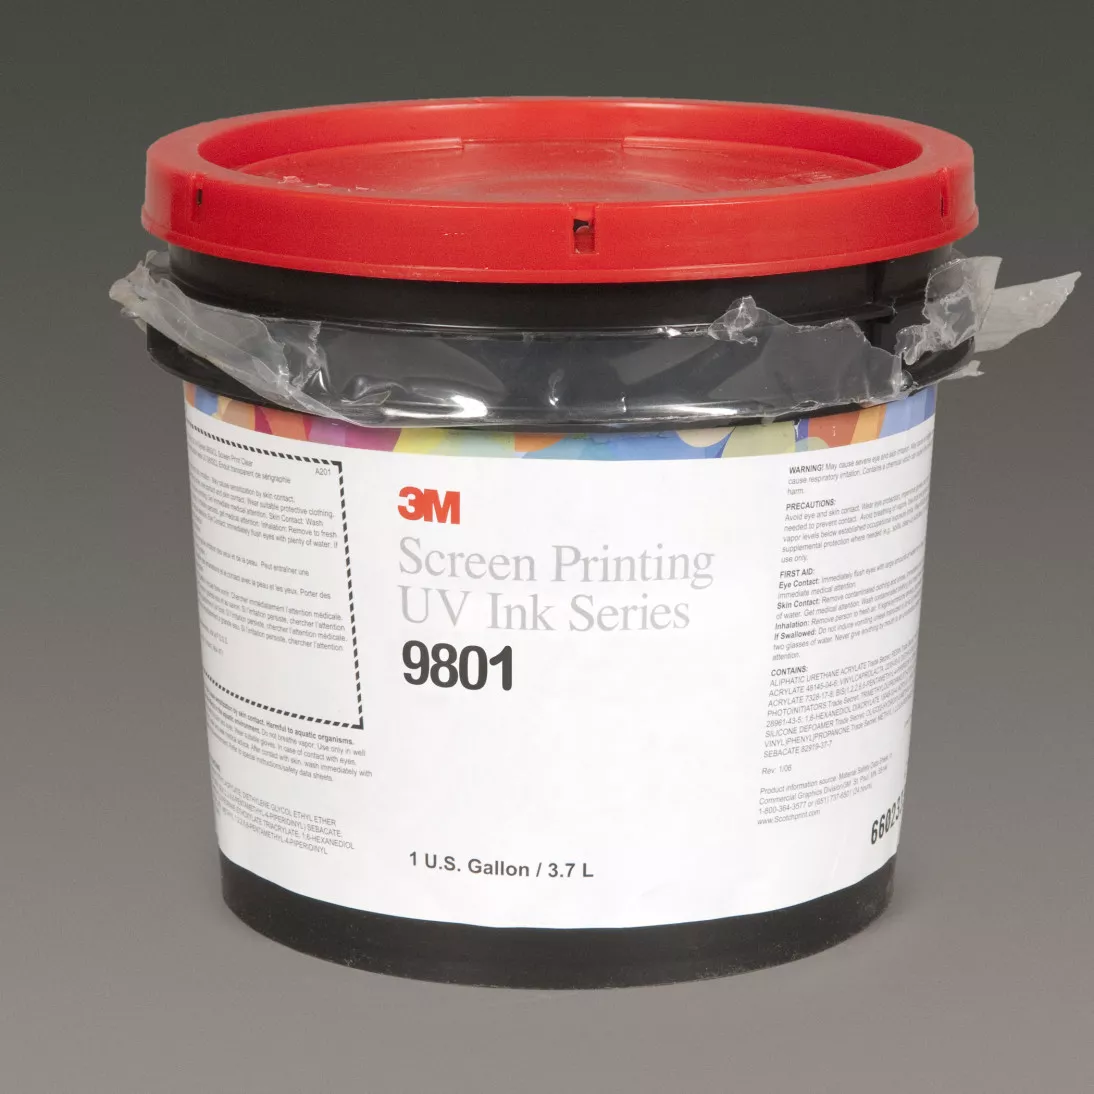 3M™ Screen Printing UV Ink 9801 Thinner, 1 Gallon Container